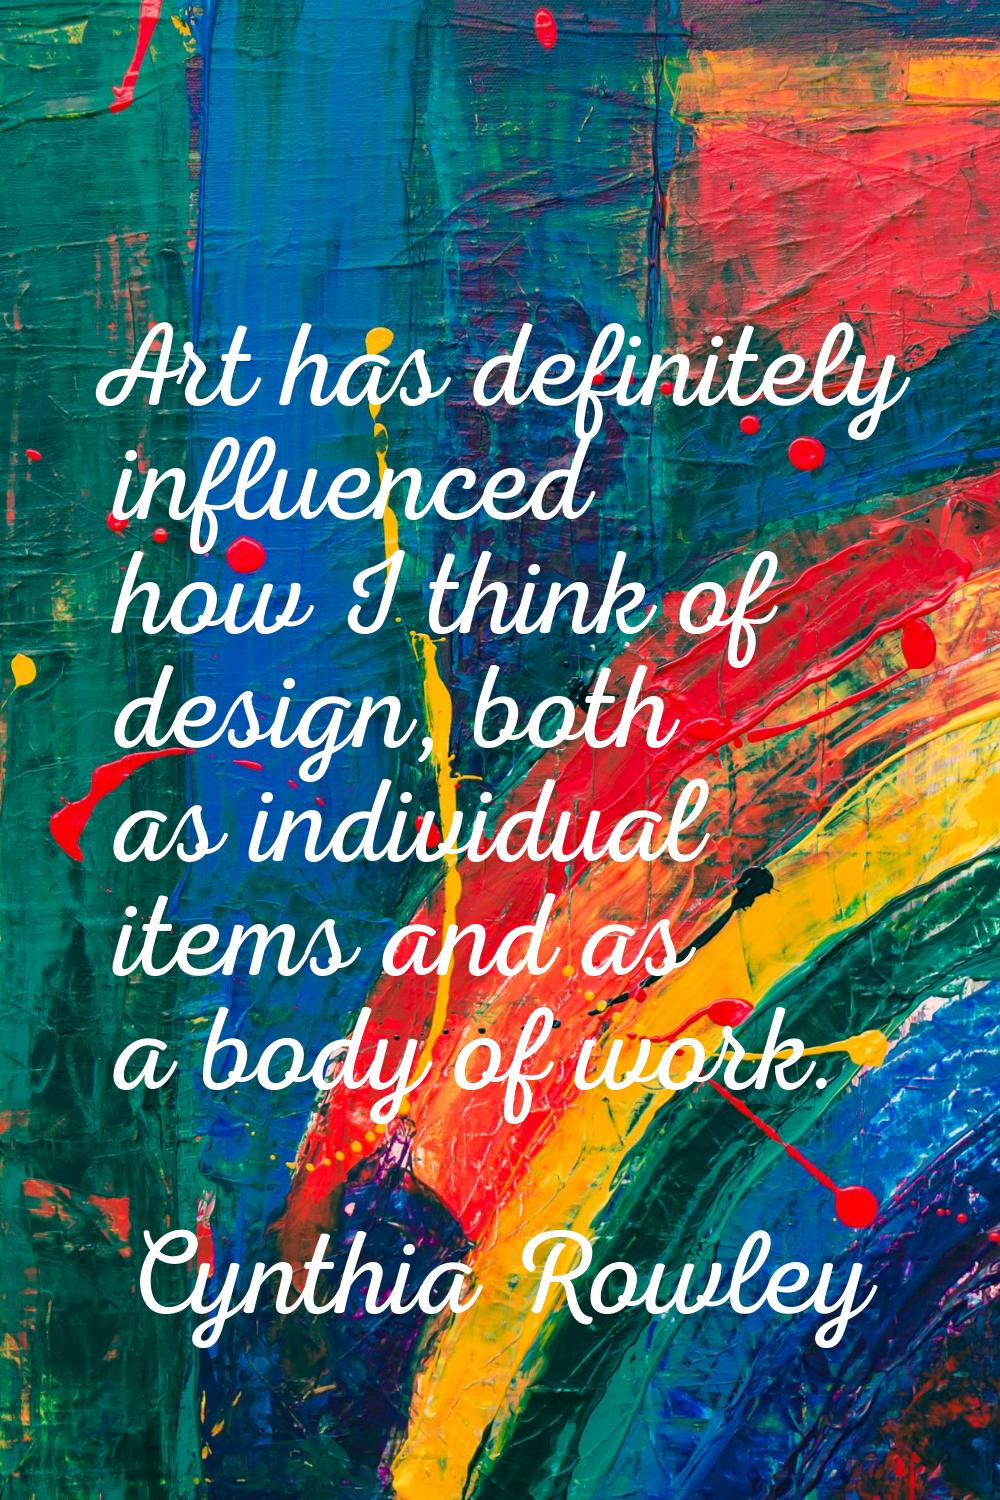 Art has definitely influenced how I think of design, both as individual items and as a body of work